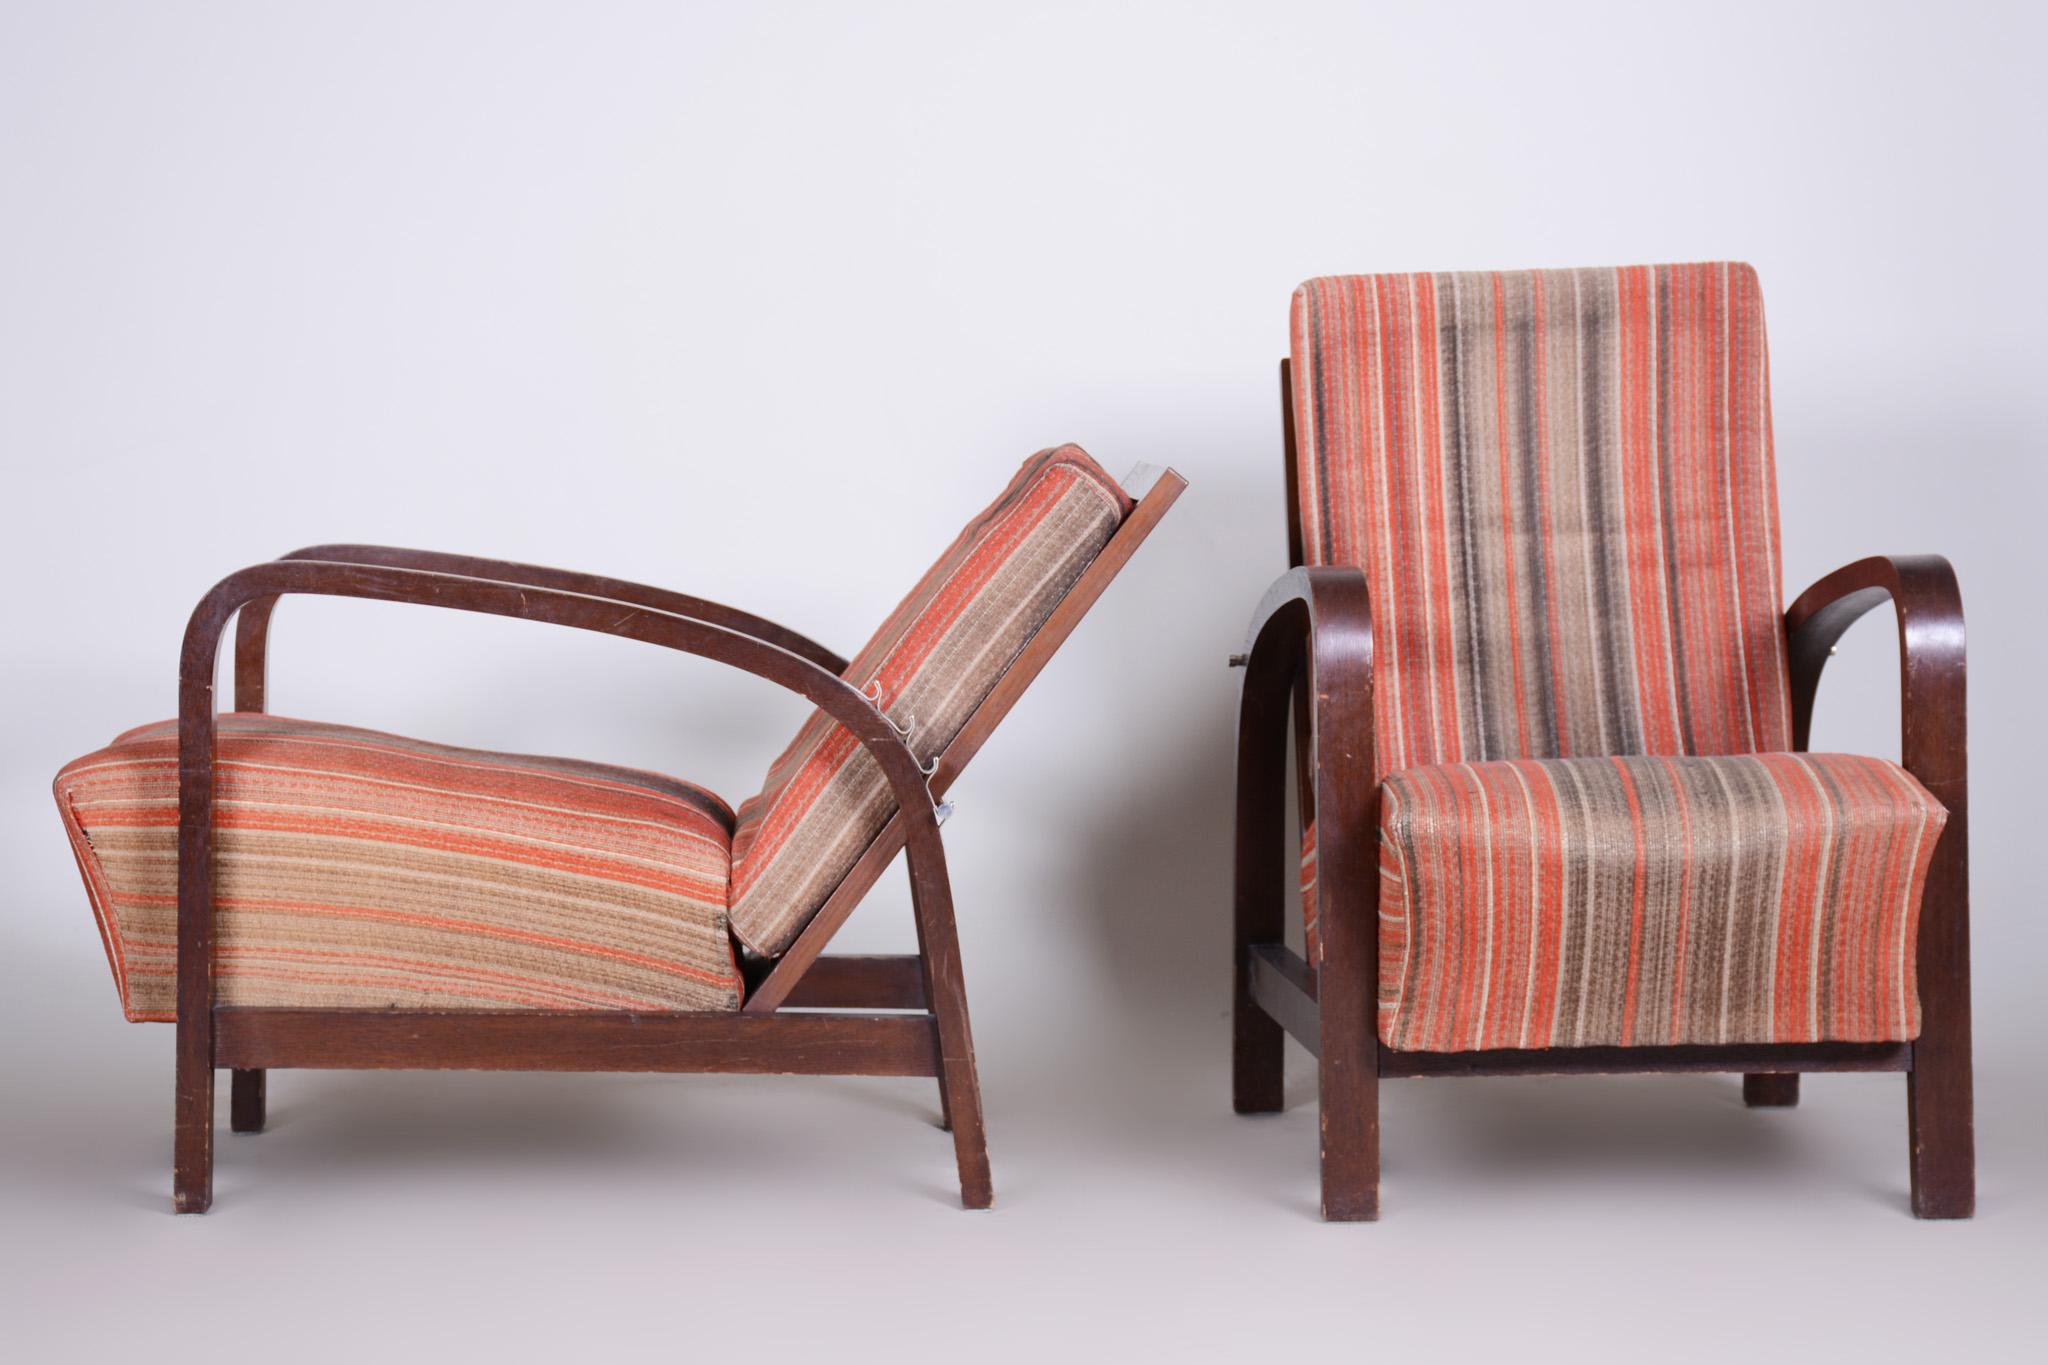 Fabric Czech Art Deco Oak Armchairs 1930s, Original Well Preserved Condition For Sale